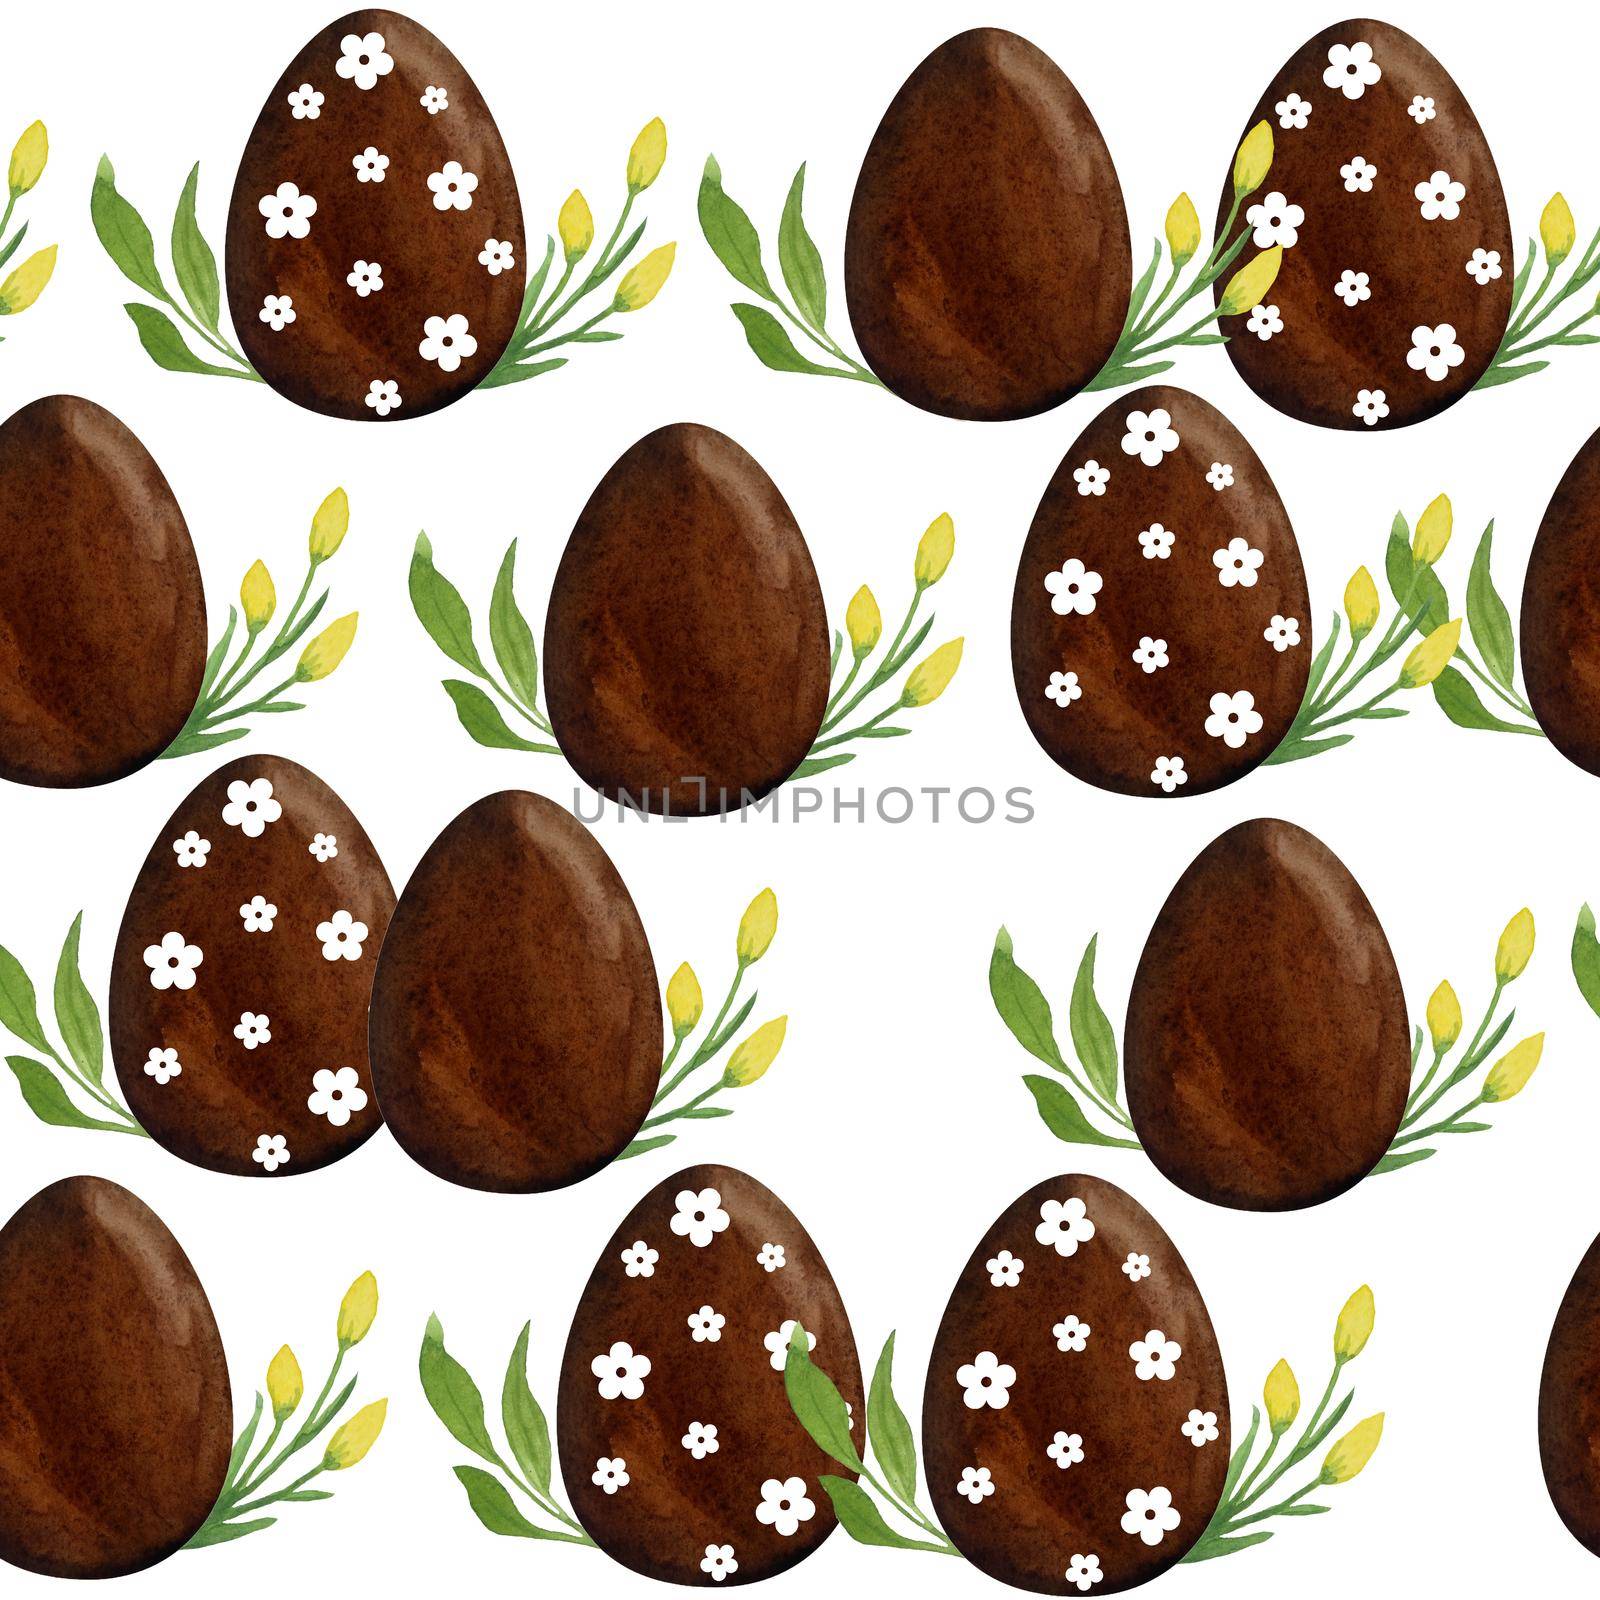 Watercolor seamless pattern with chocolate Easter eggs grass buttercup flowers and leaves. Easter hunt celebration brown design. Spring season background with religious Christian symbols. by Lagmar